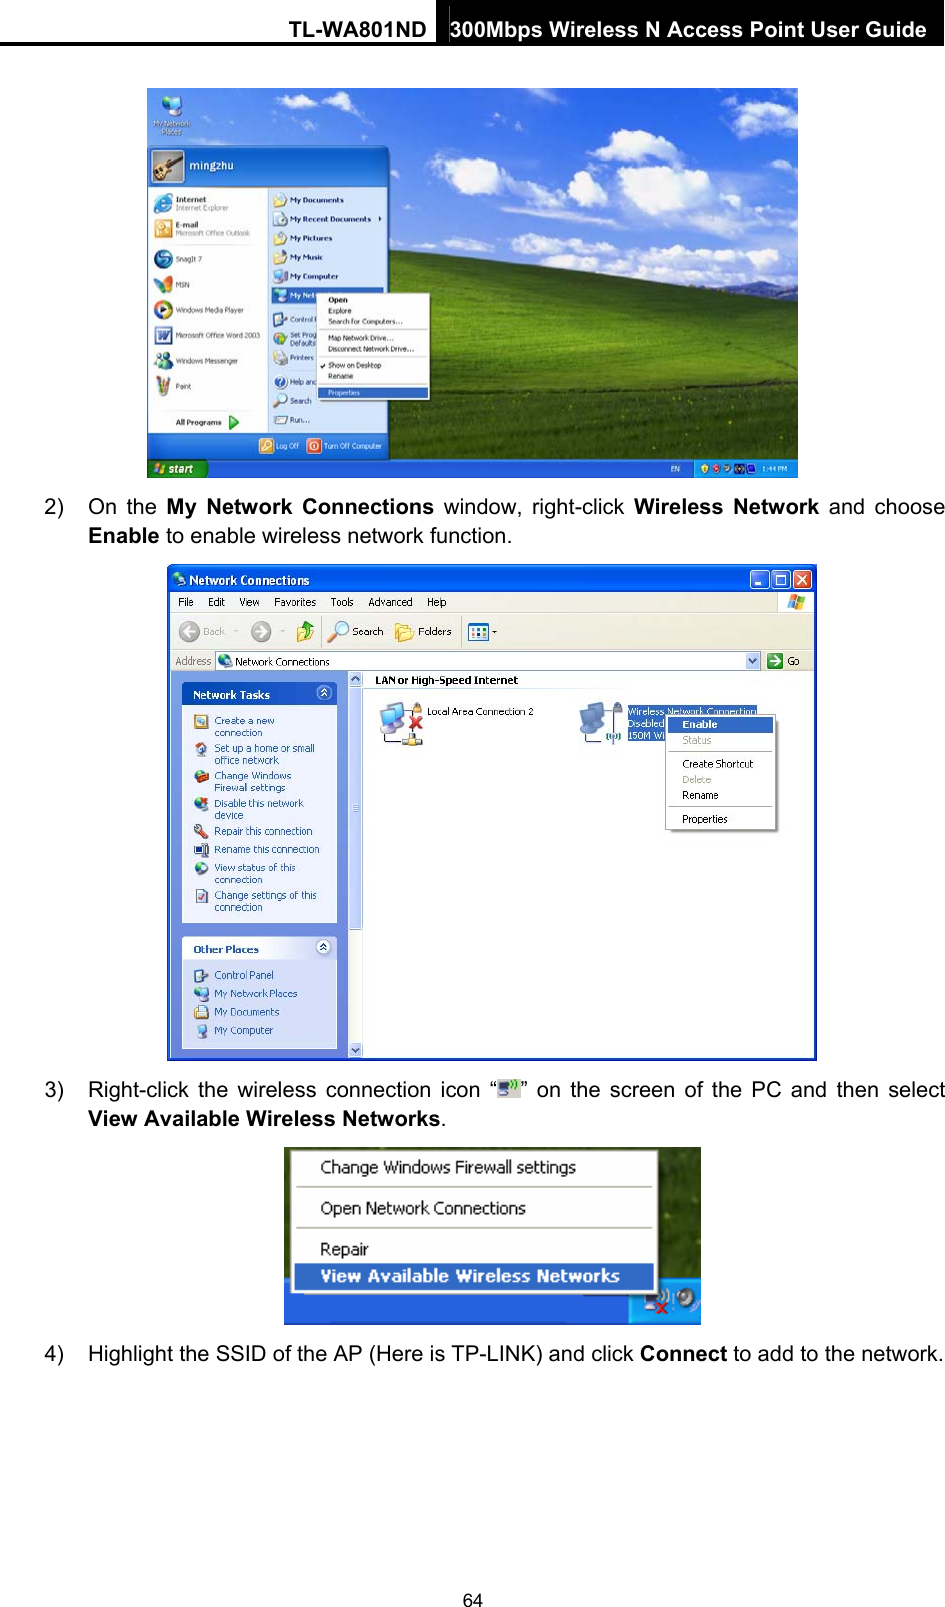 TL-WA801ND 300Mbps Wireless N Access Point User Guide  2) On the My Network Connections window, right-click Wireless Network and choose Enable to enable wireless network function.  3)  Right-click the wireless connection icon “ ” on the screen of the PC and then select View Available Wireless Networks.  4)  Highlight the SSID of the AP (Here is TP-LINK) and click Connect to add to the network. 64 